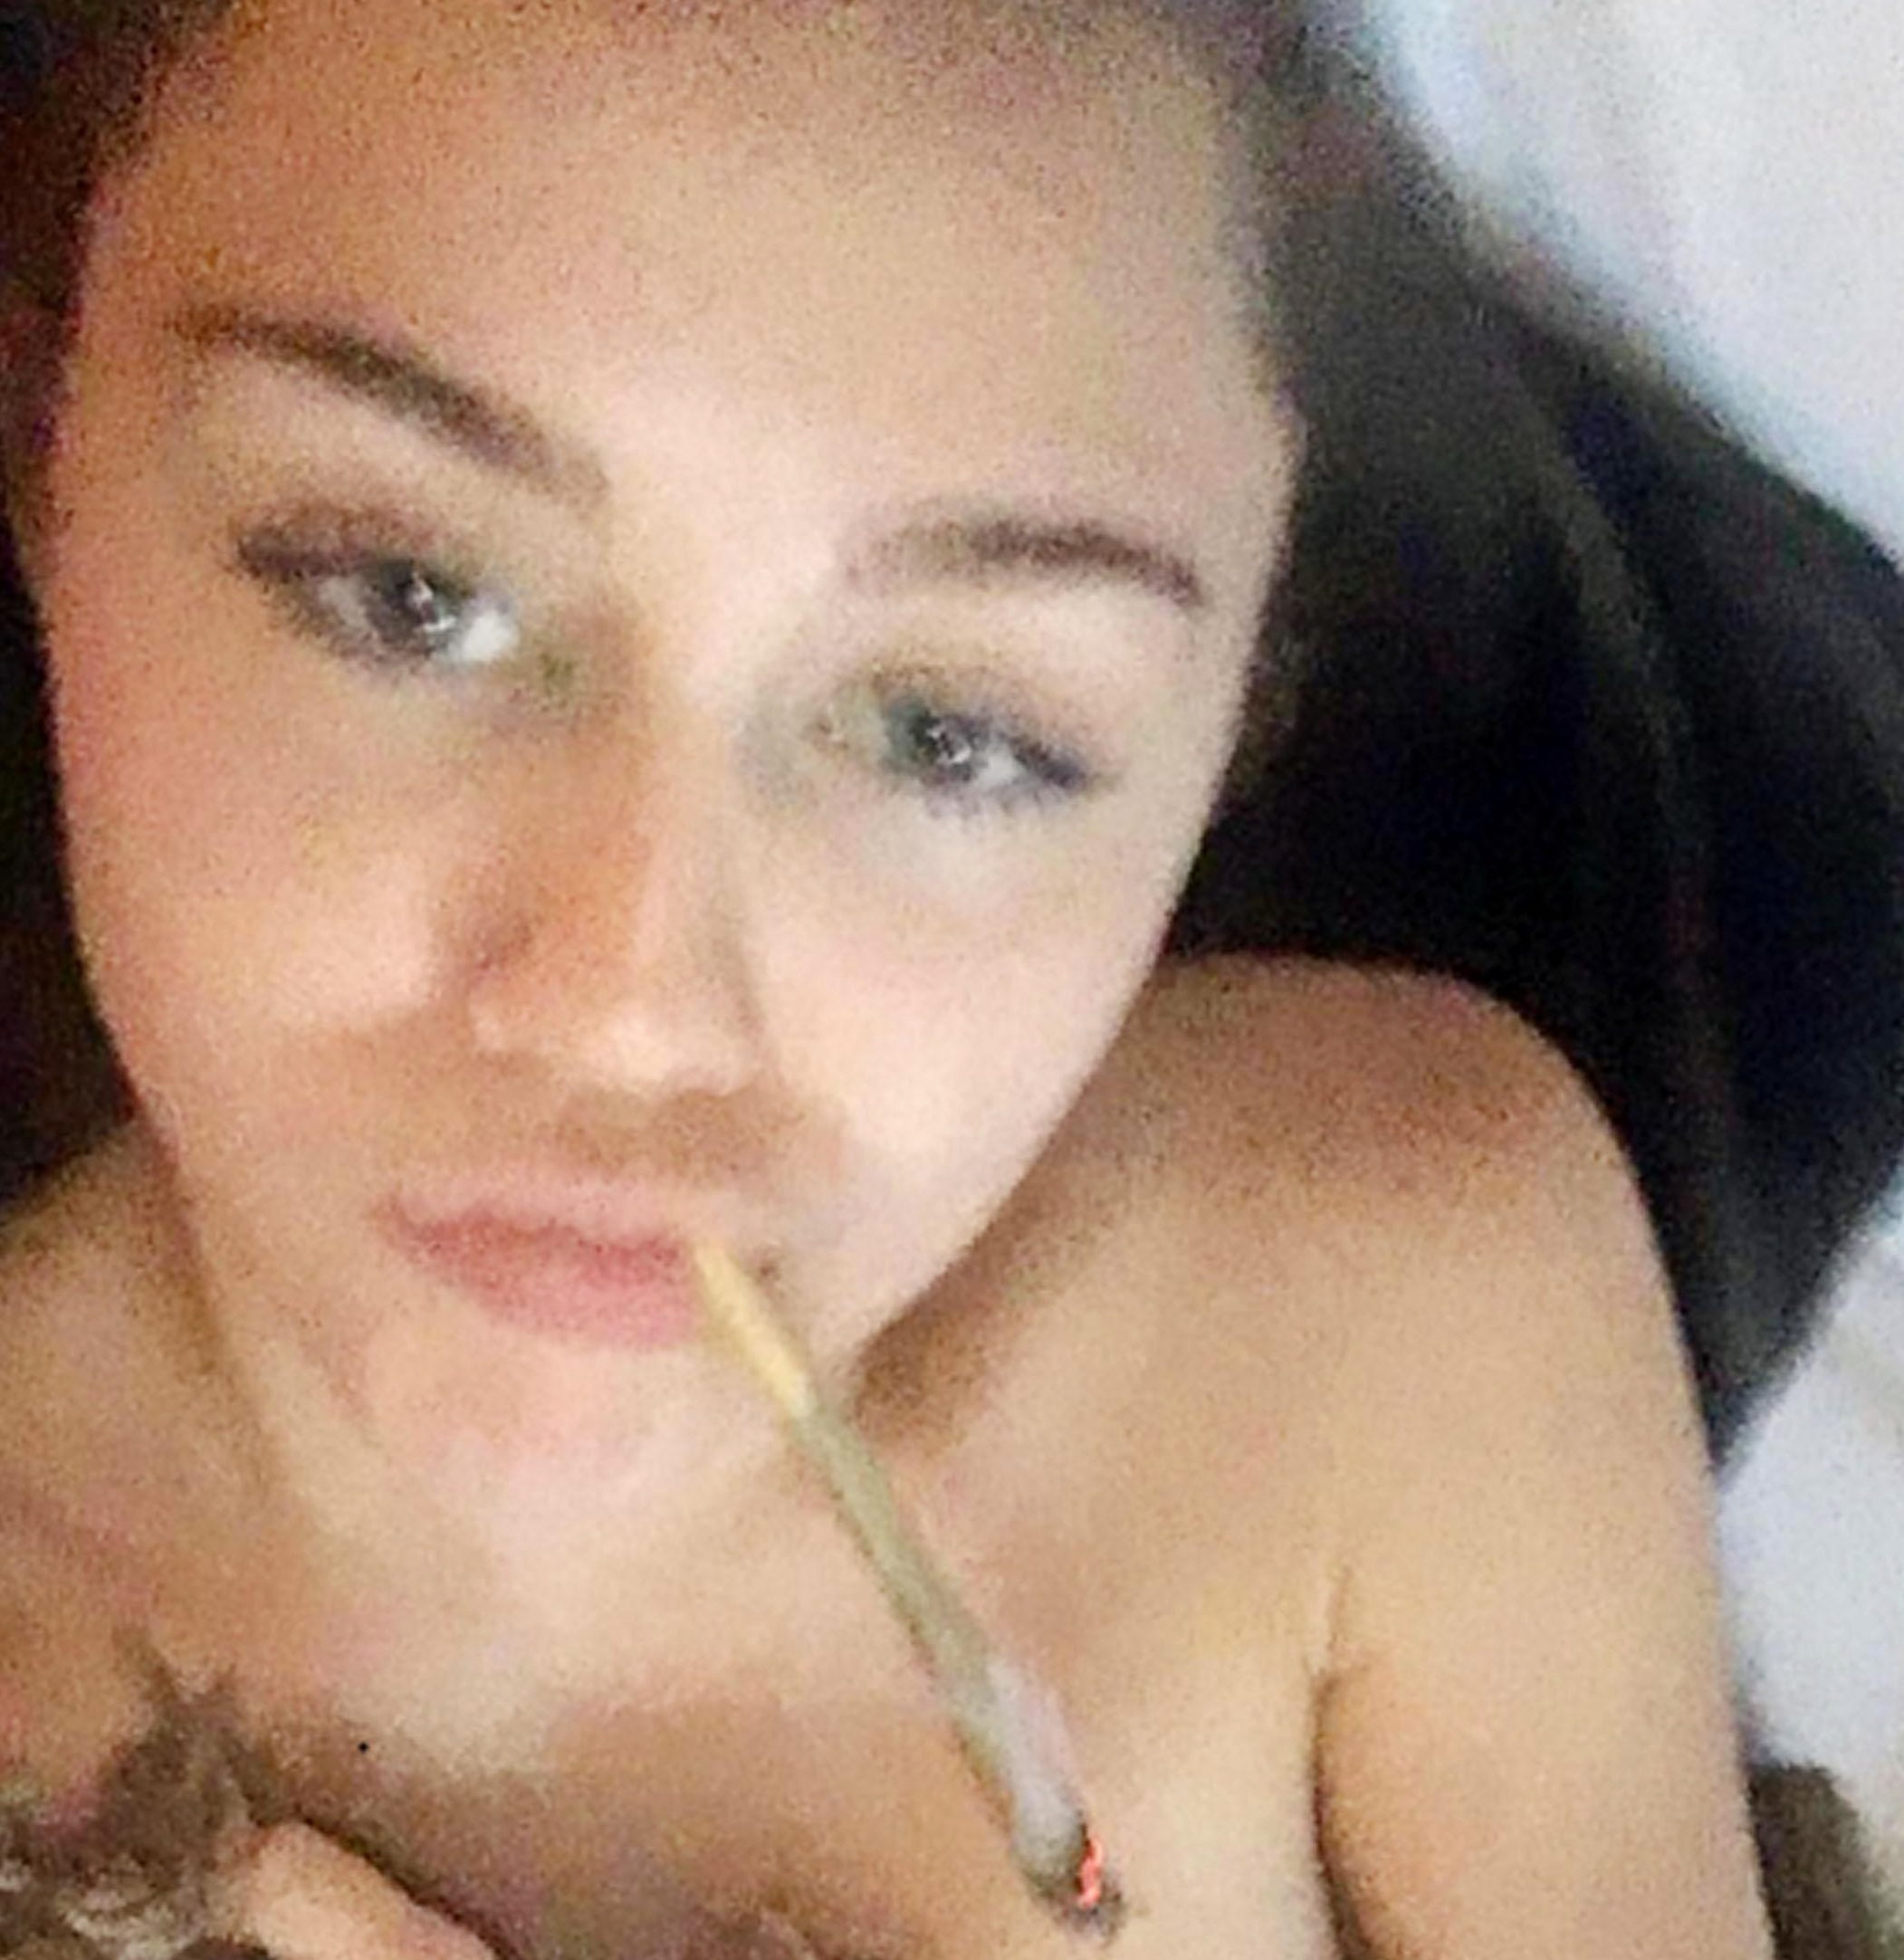 Best of Naked chicks and weed